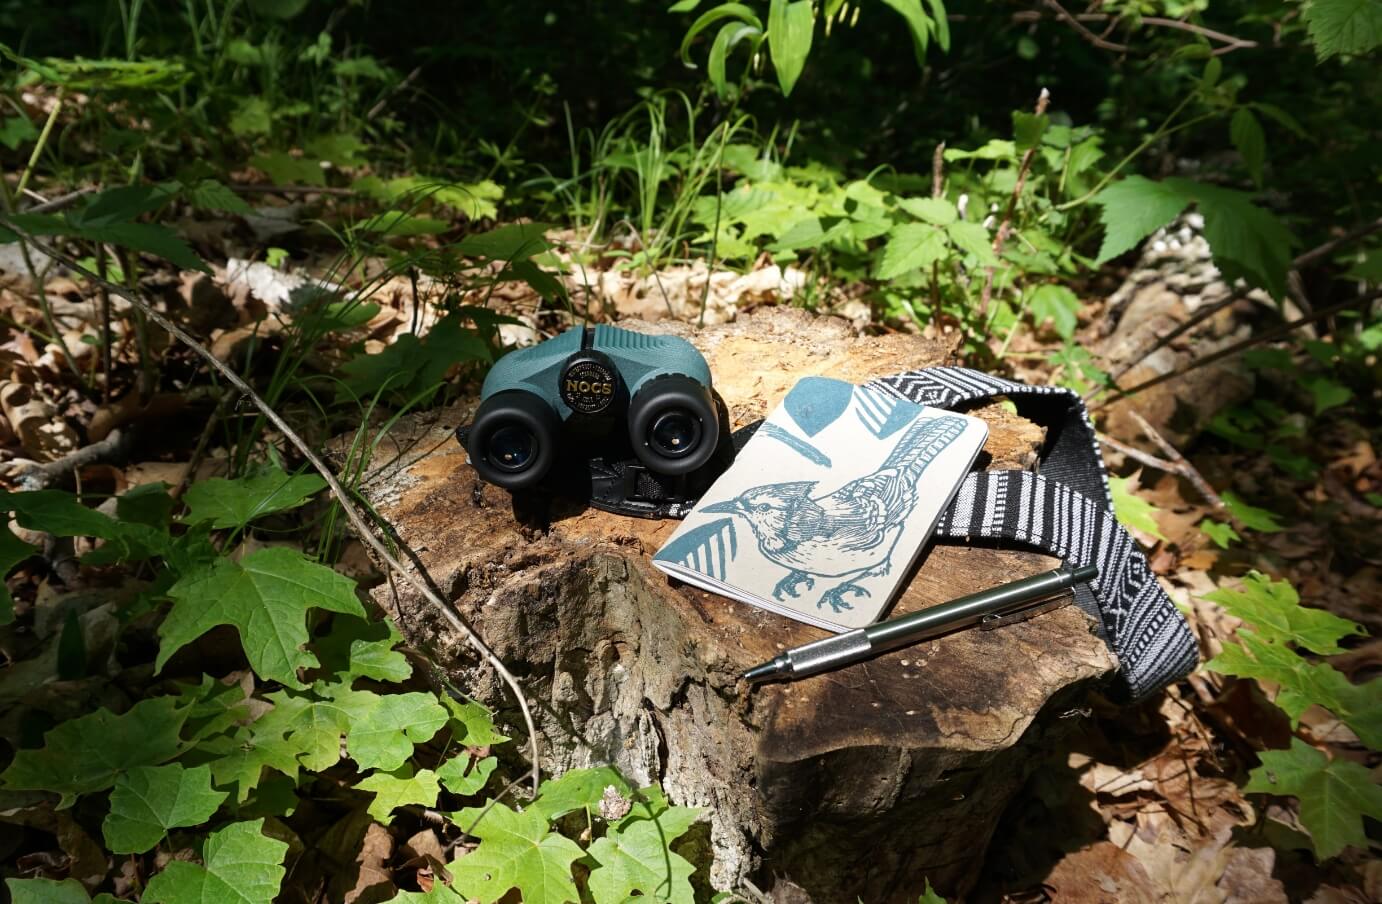 A pair of Nocs standard issue 8x25 on a rock surrounded by green bushes, with a notebook and a pen